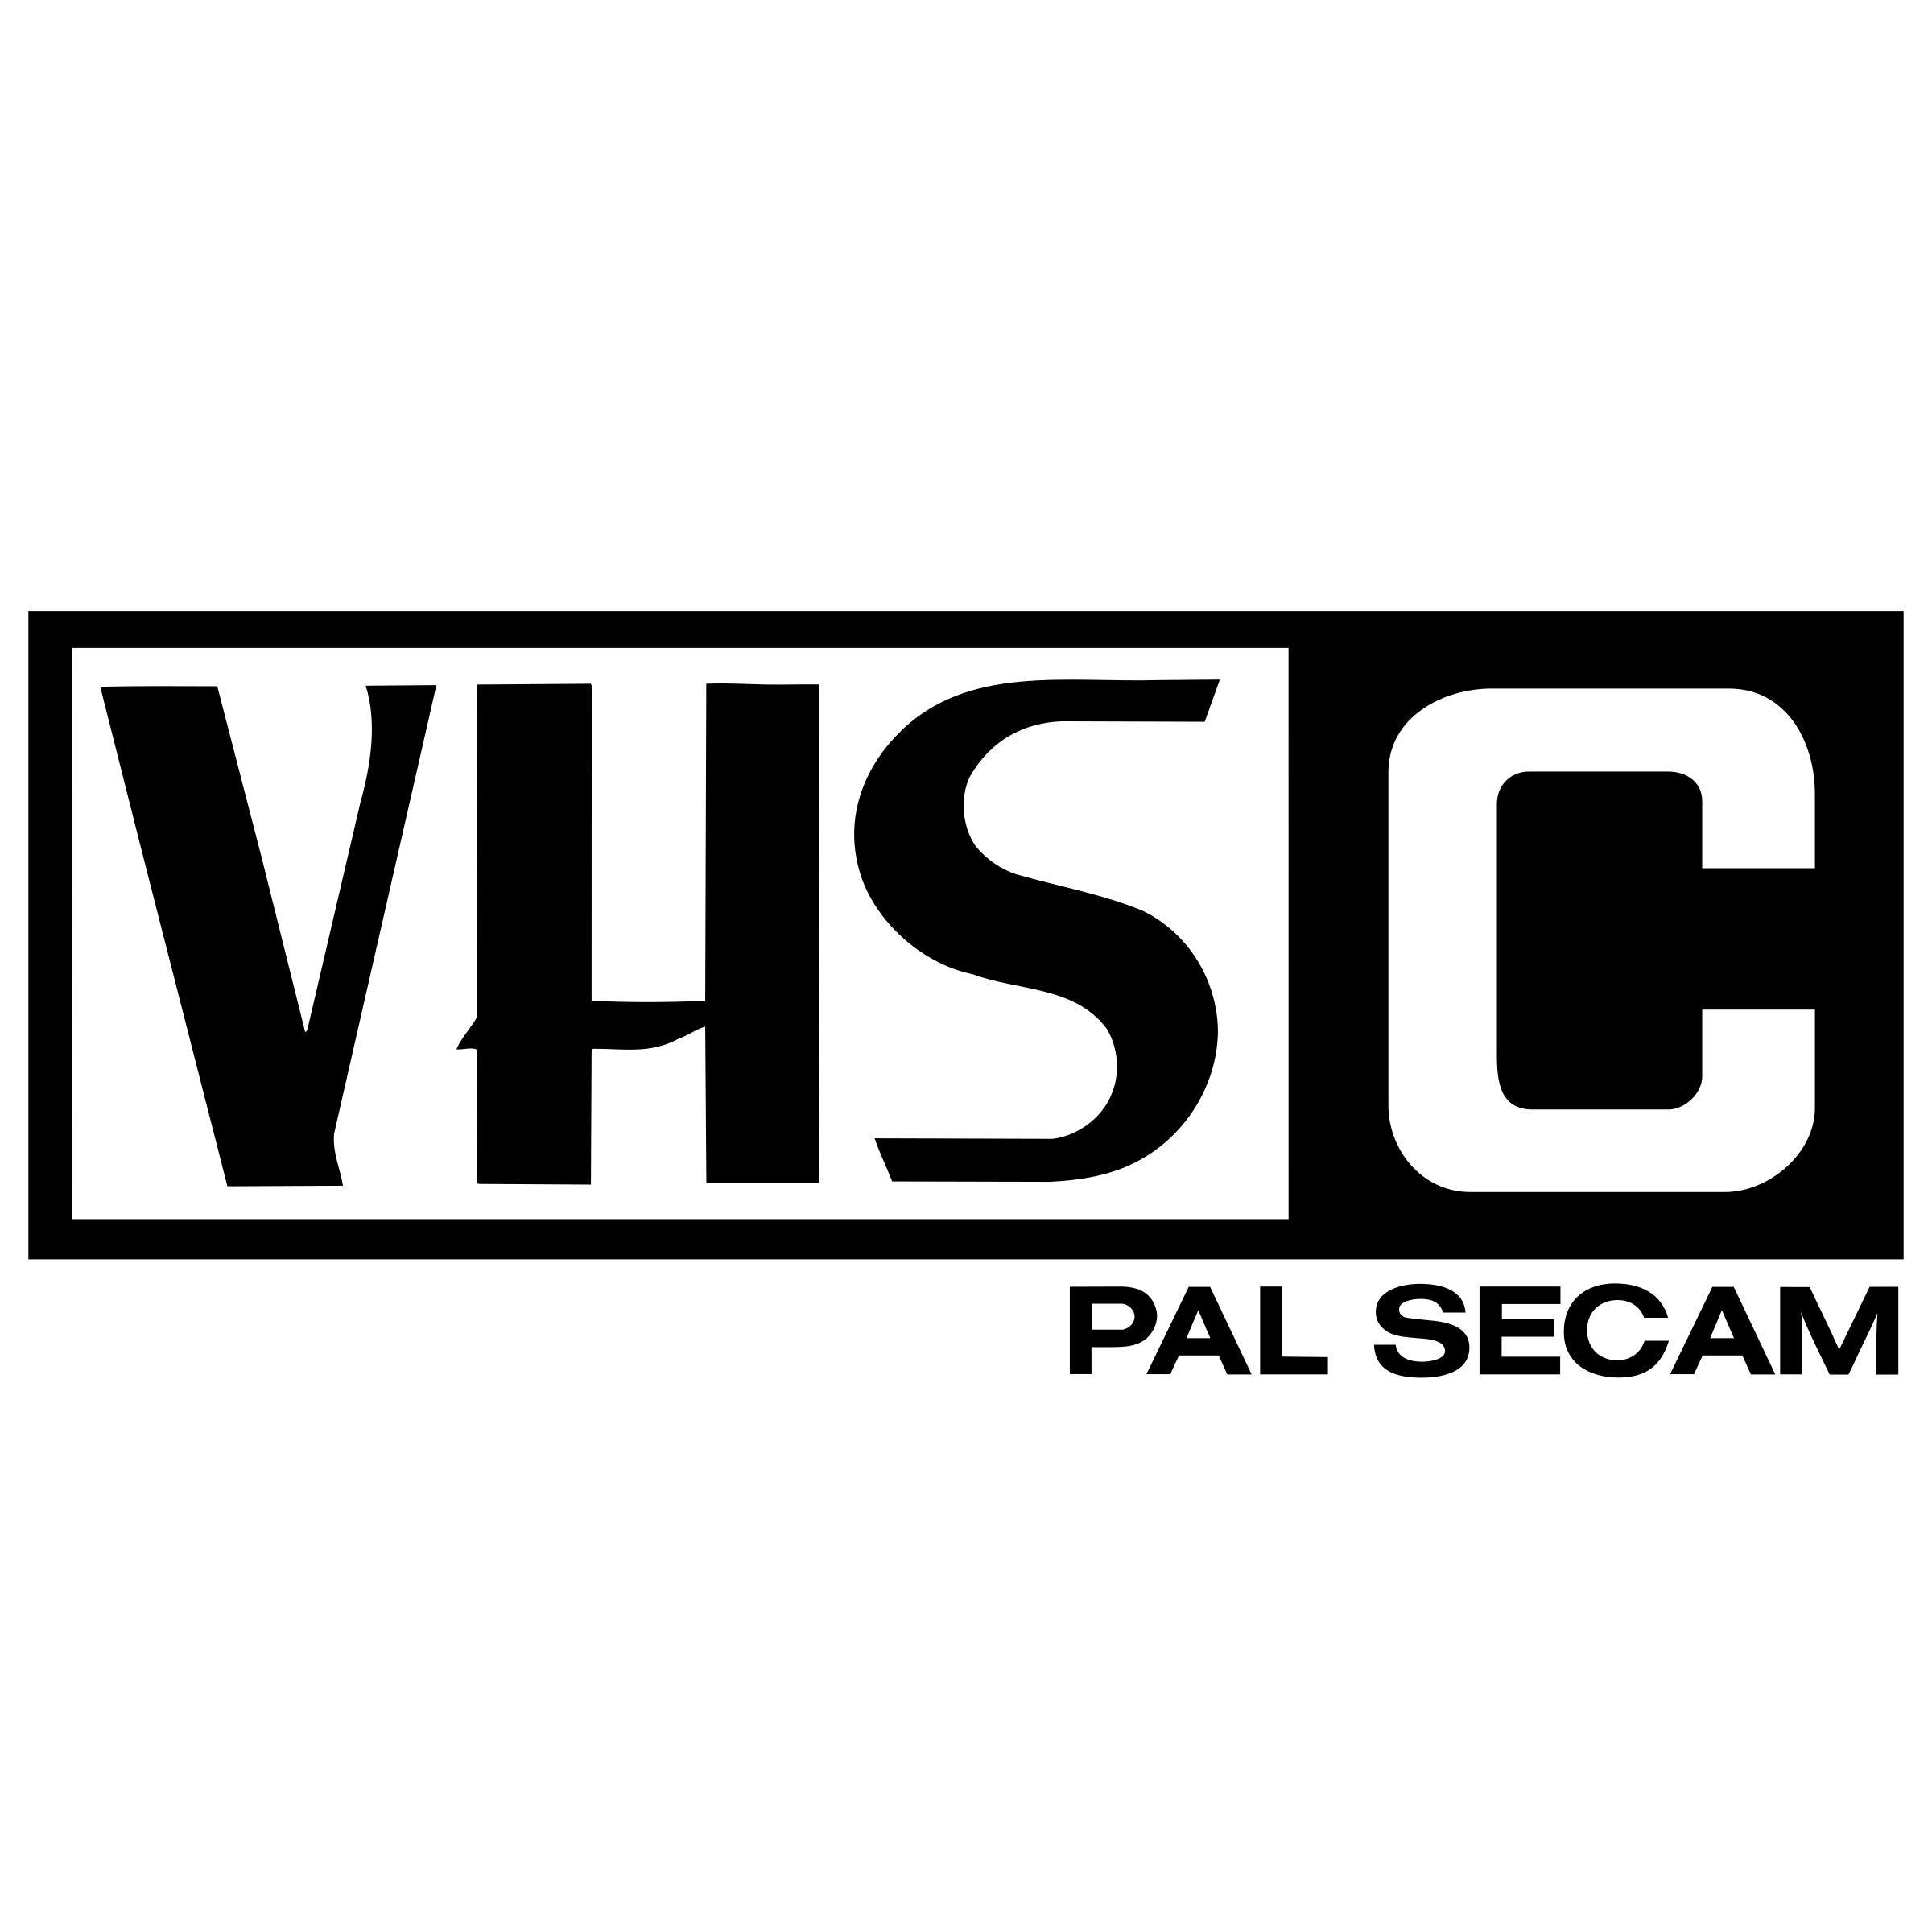 vhs-c-logo-png-transparent.png — Are.na